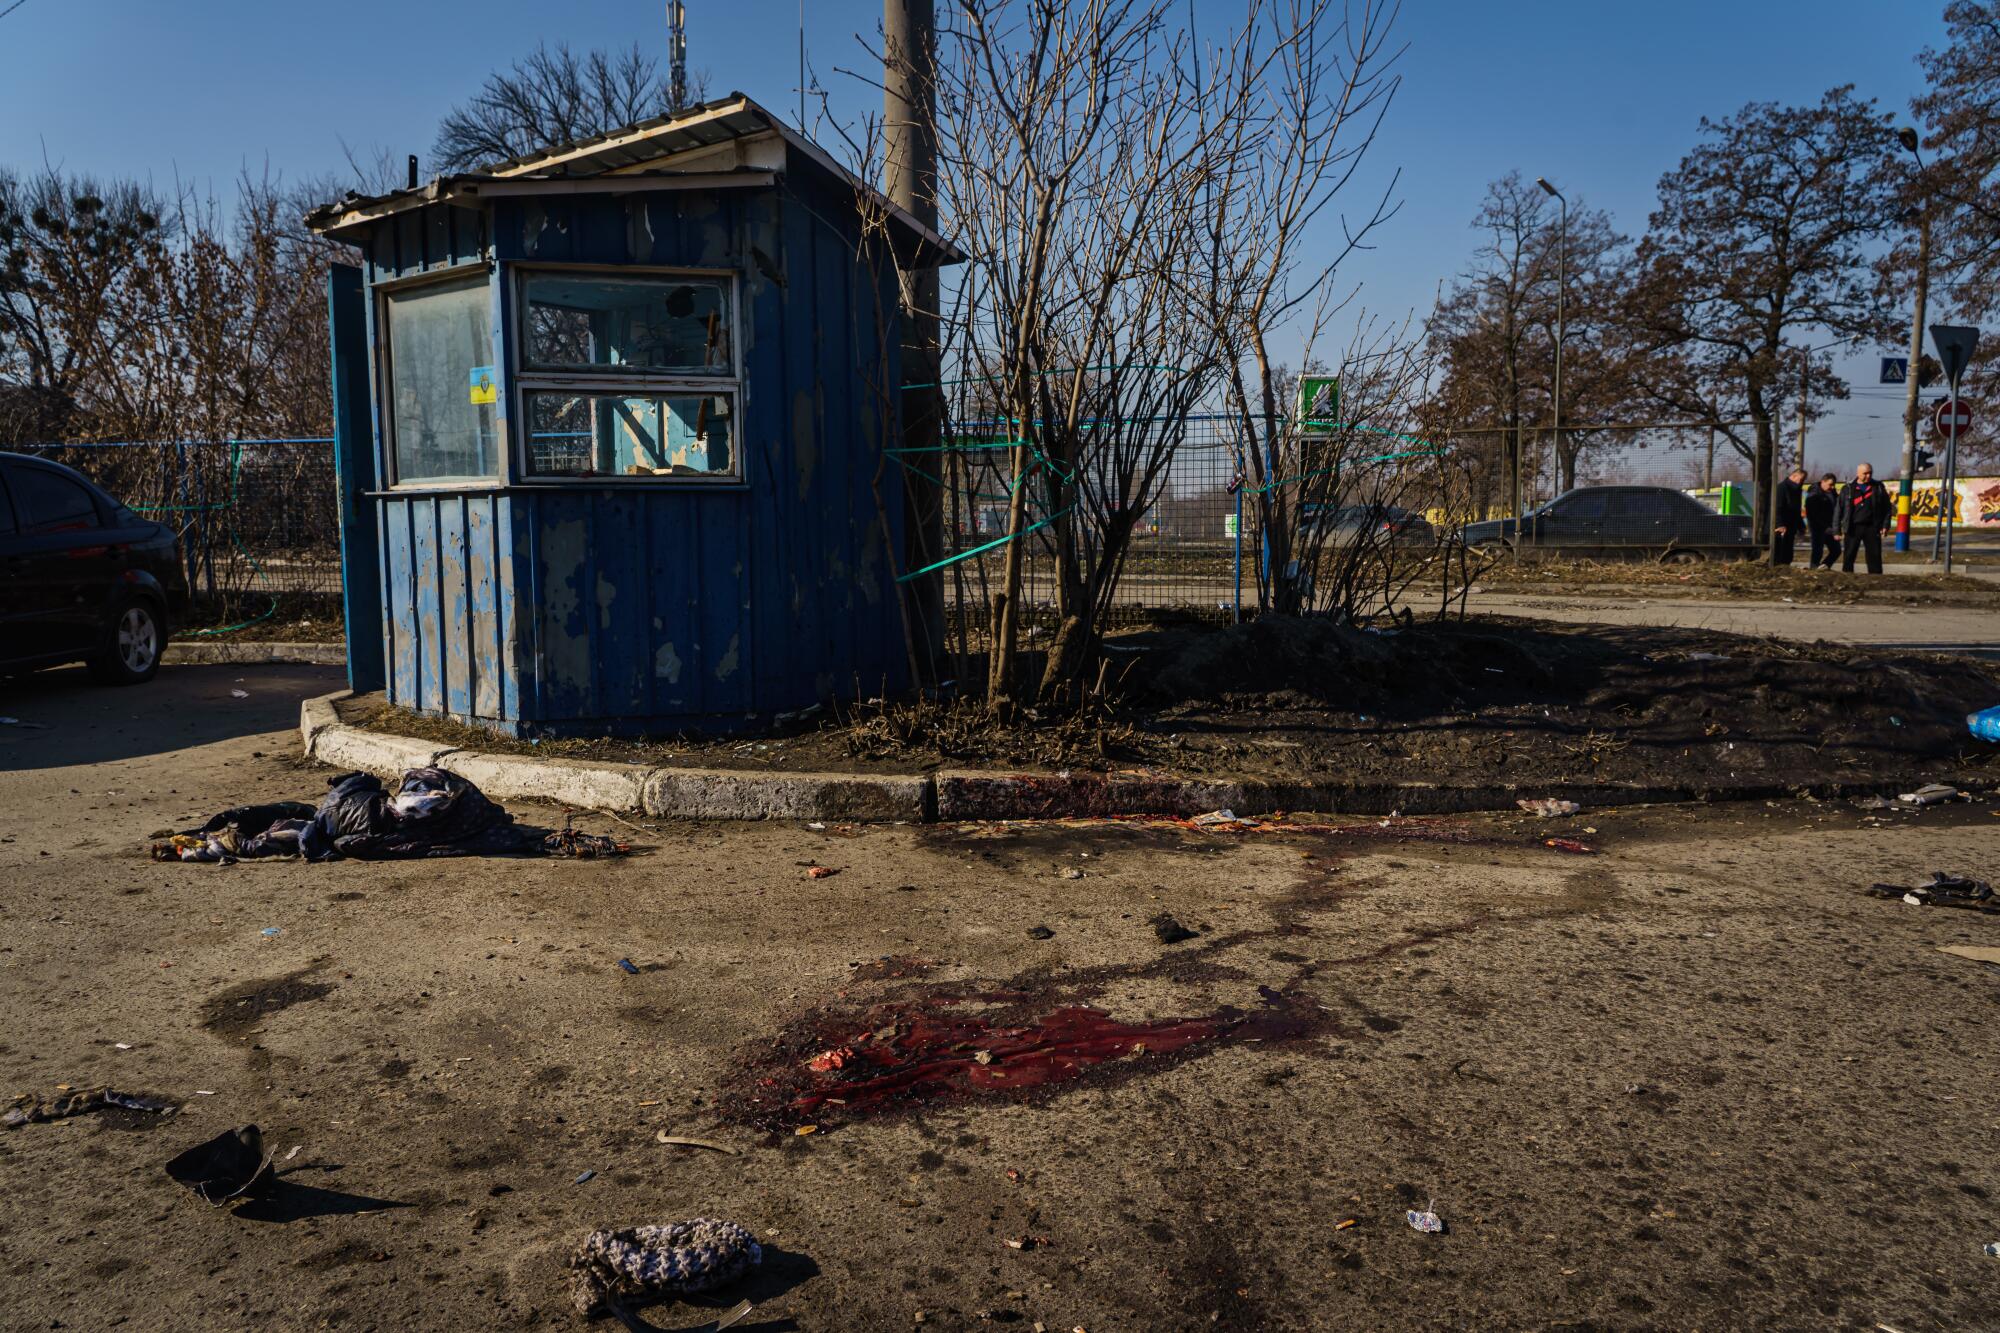 A pool of blood on the ground outside near a small blue building.